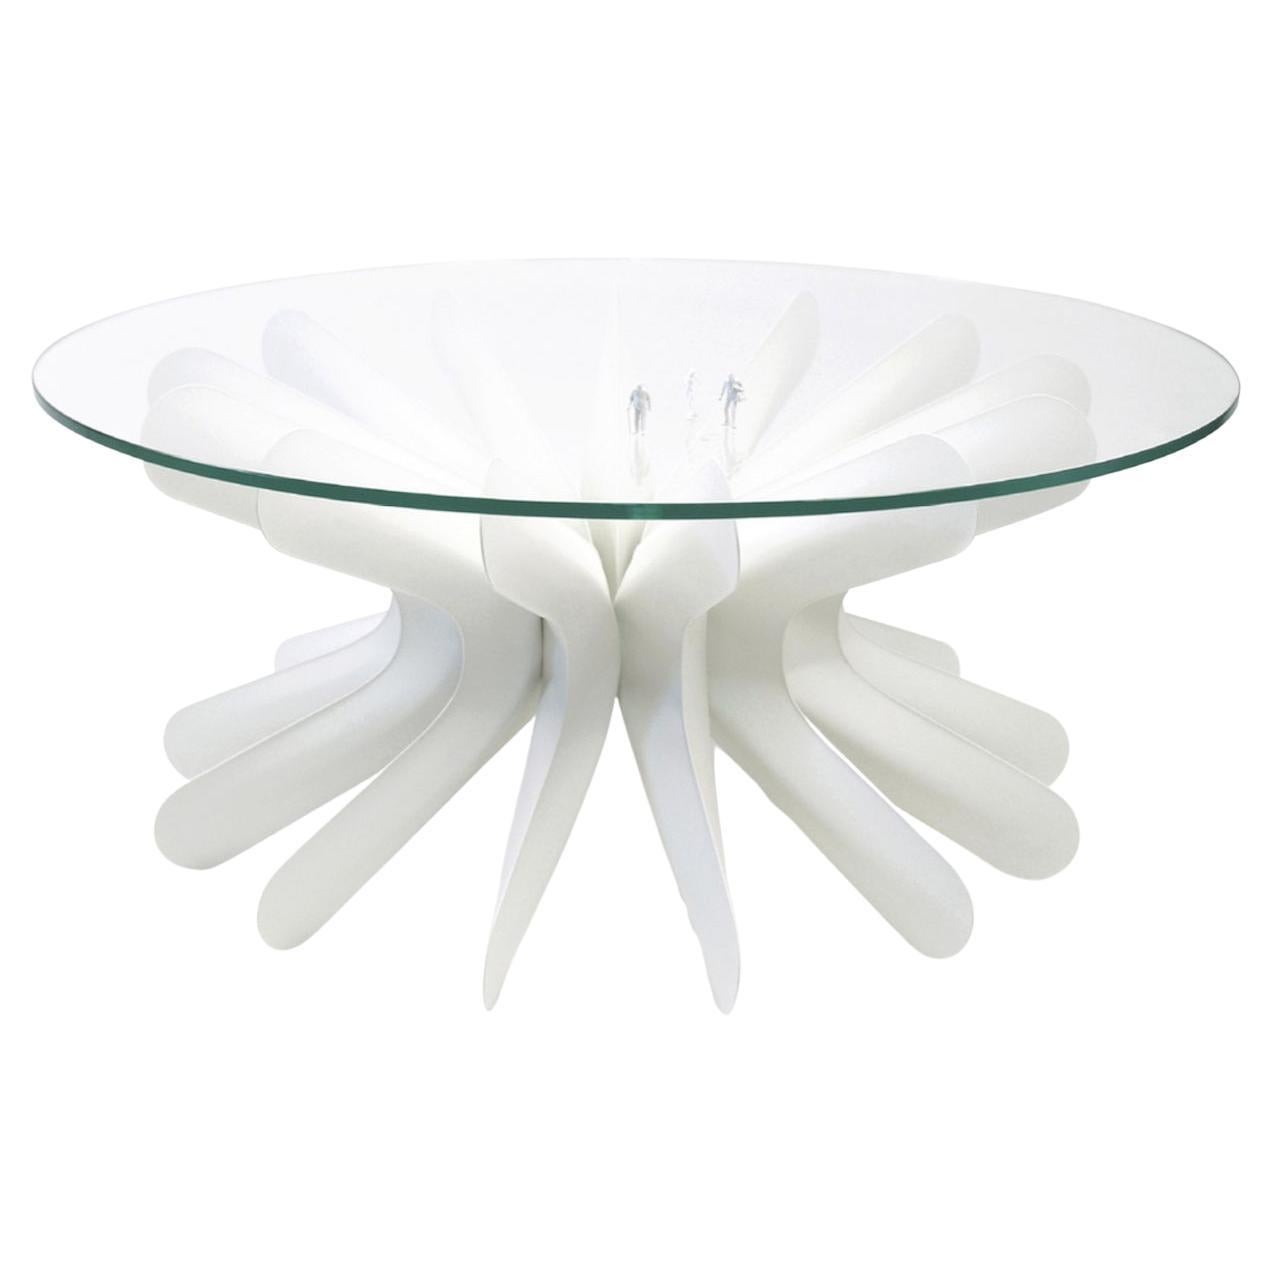 Contemporary Coffee Table 'Steel in Rotation No. 1' by Zieta, Large, White Matt For Sale